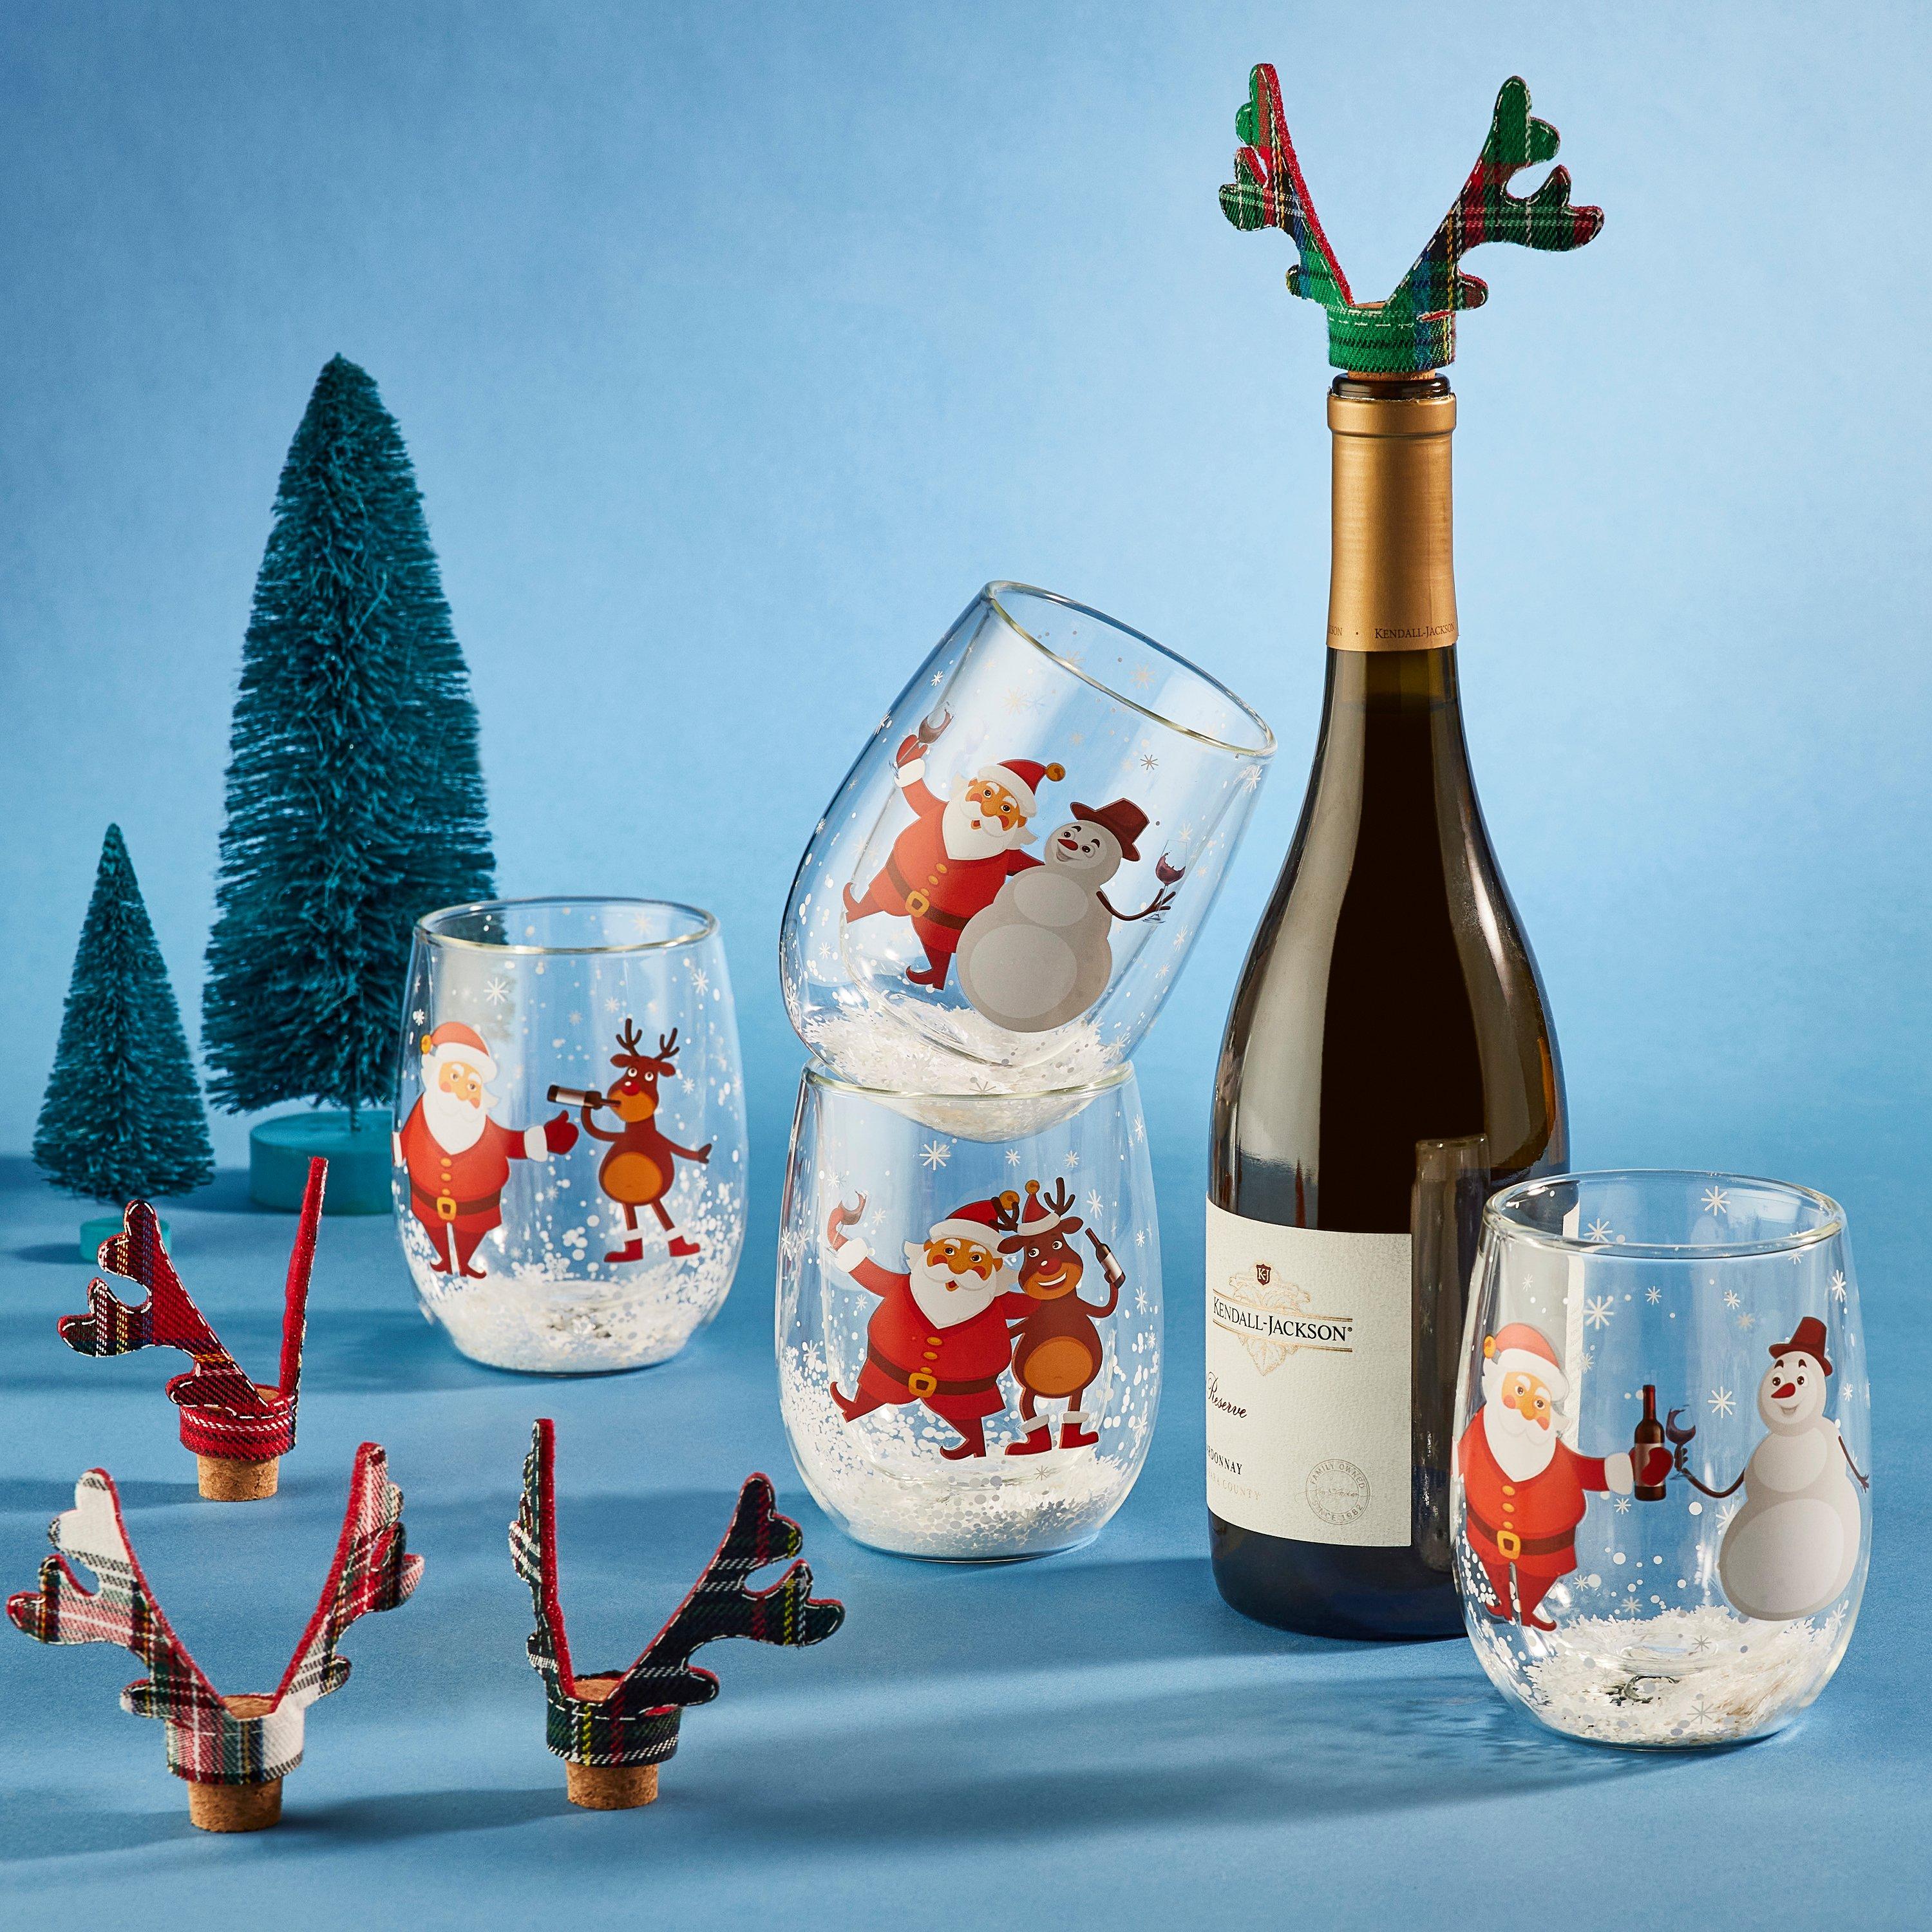 Holiday Cheer Set of 4 Stemless Wine Glasses with Christmas Icons